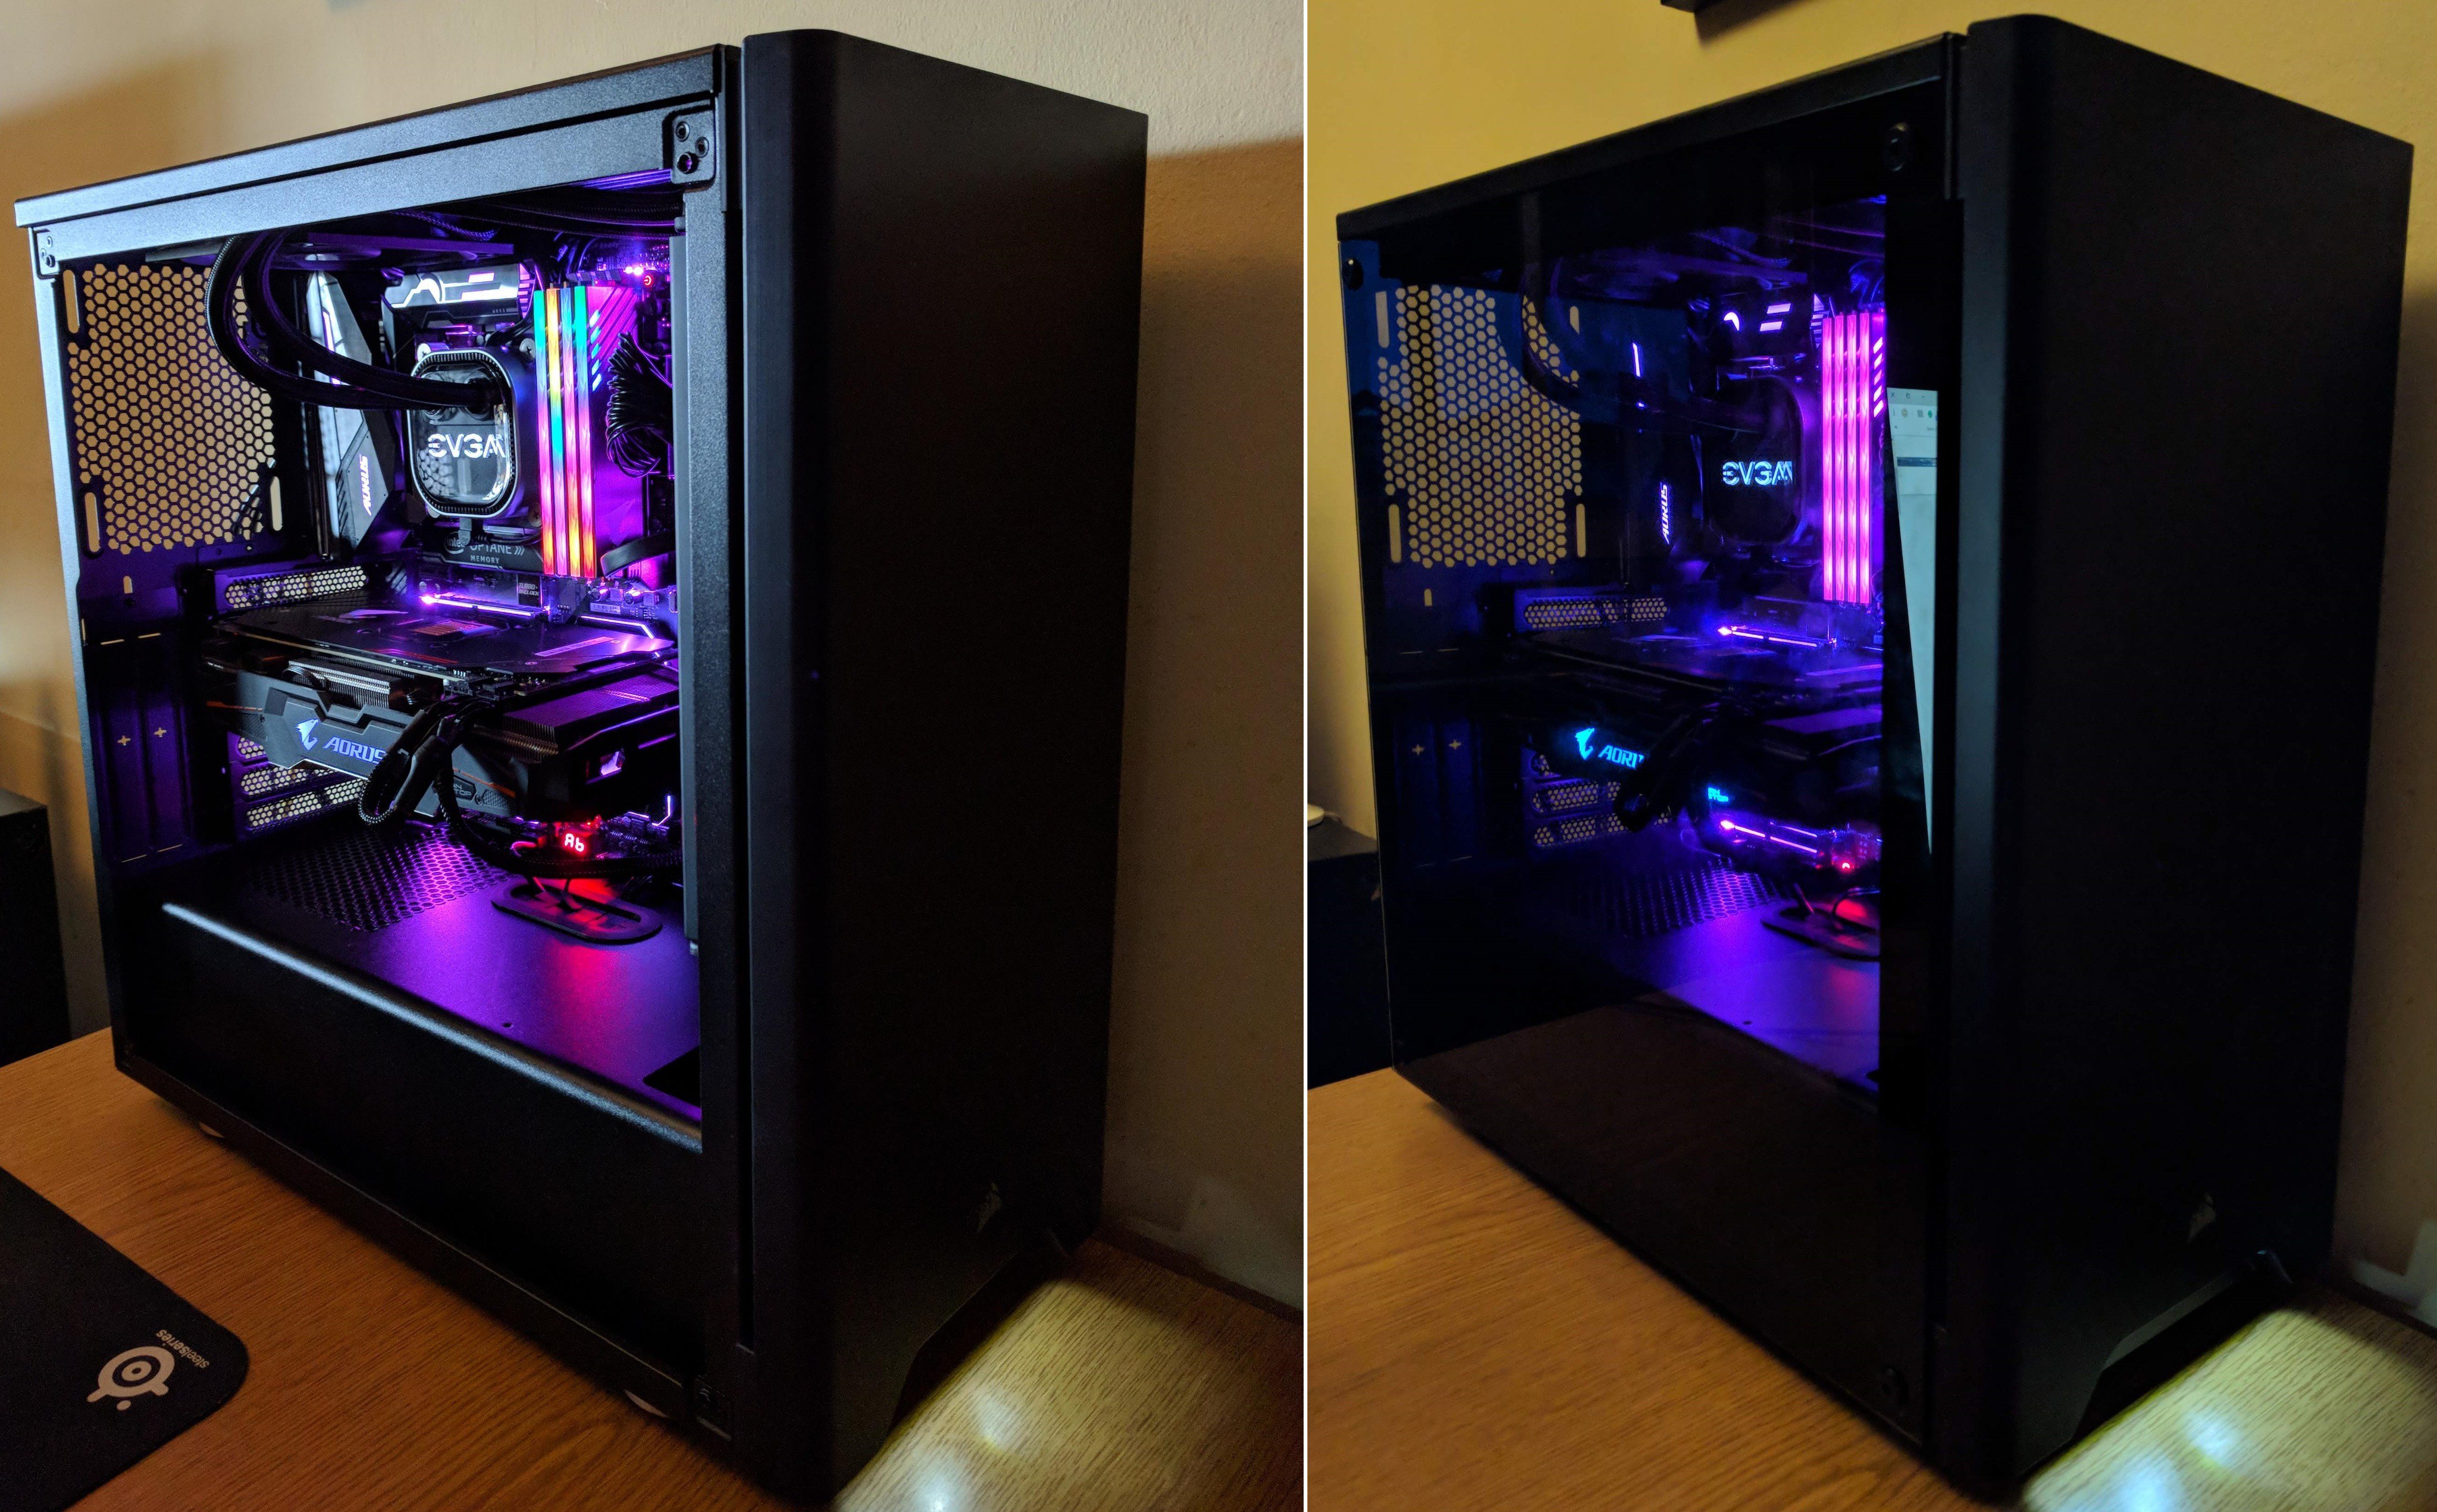 PedroPCMR on Twitter: "It's coming to life! Loved building in the @CORSAIR Carbide 275R. size, good cable management and approved tempered glass. https://t.co/gzZ5Aujl0t" / Twitter